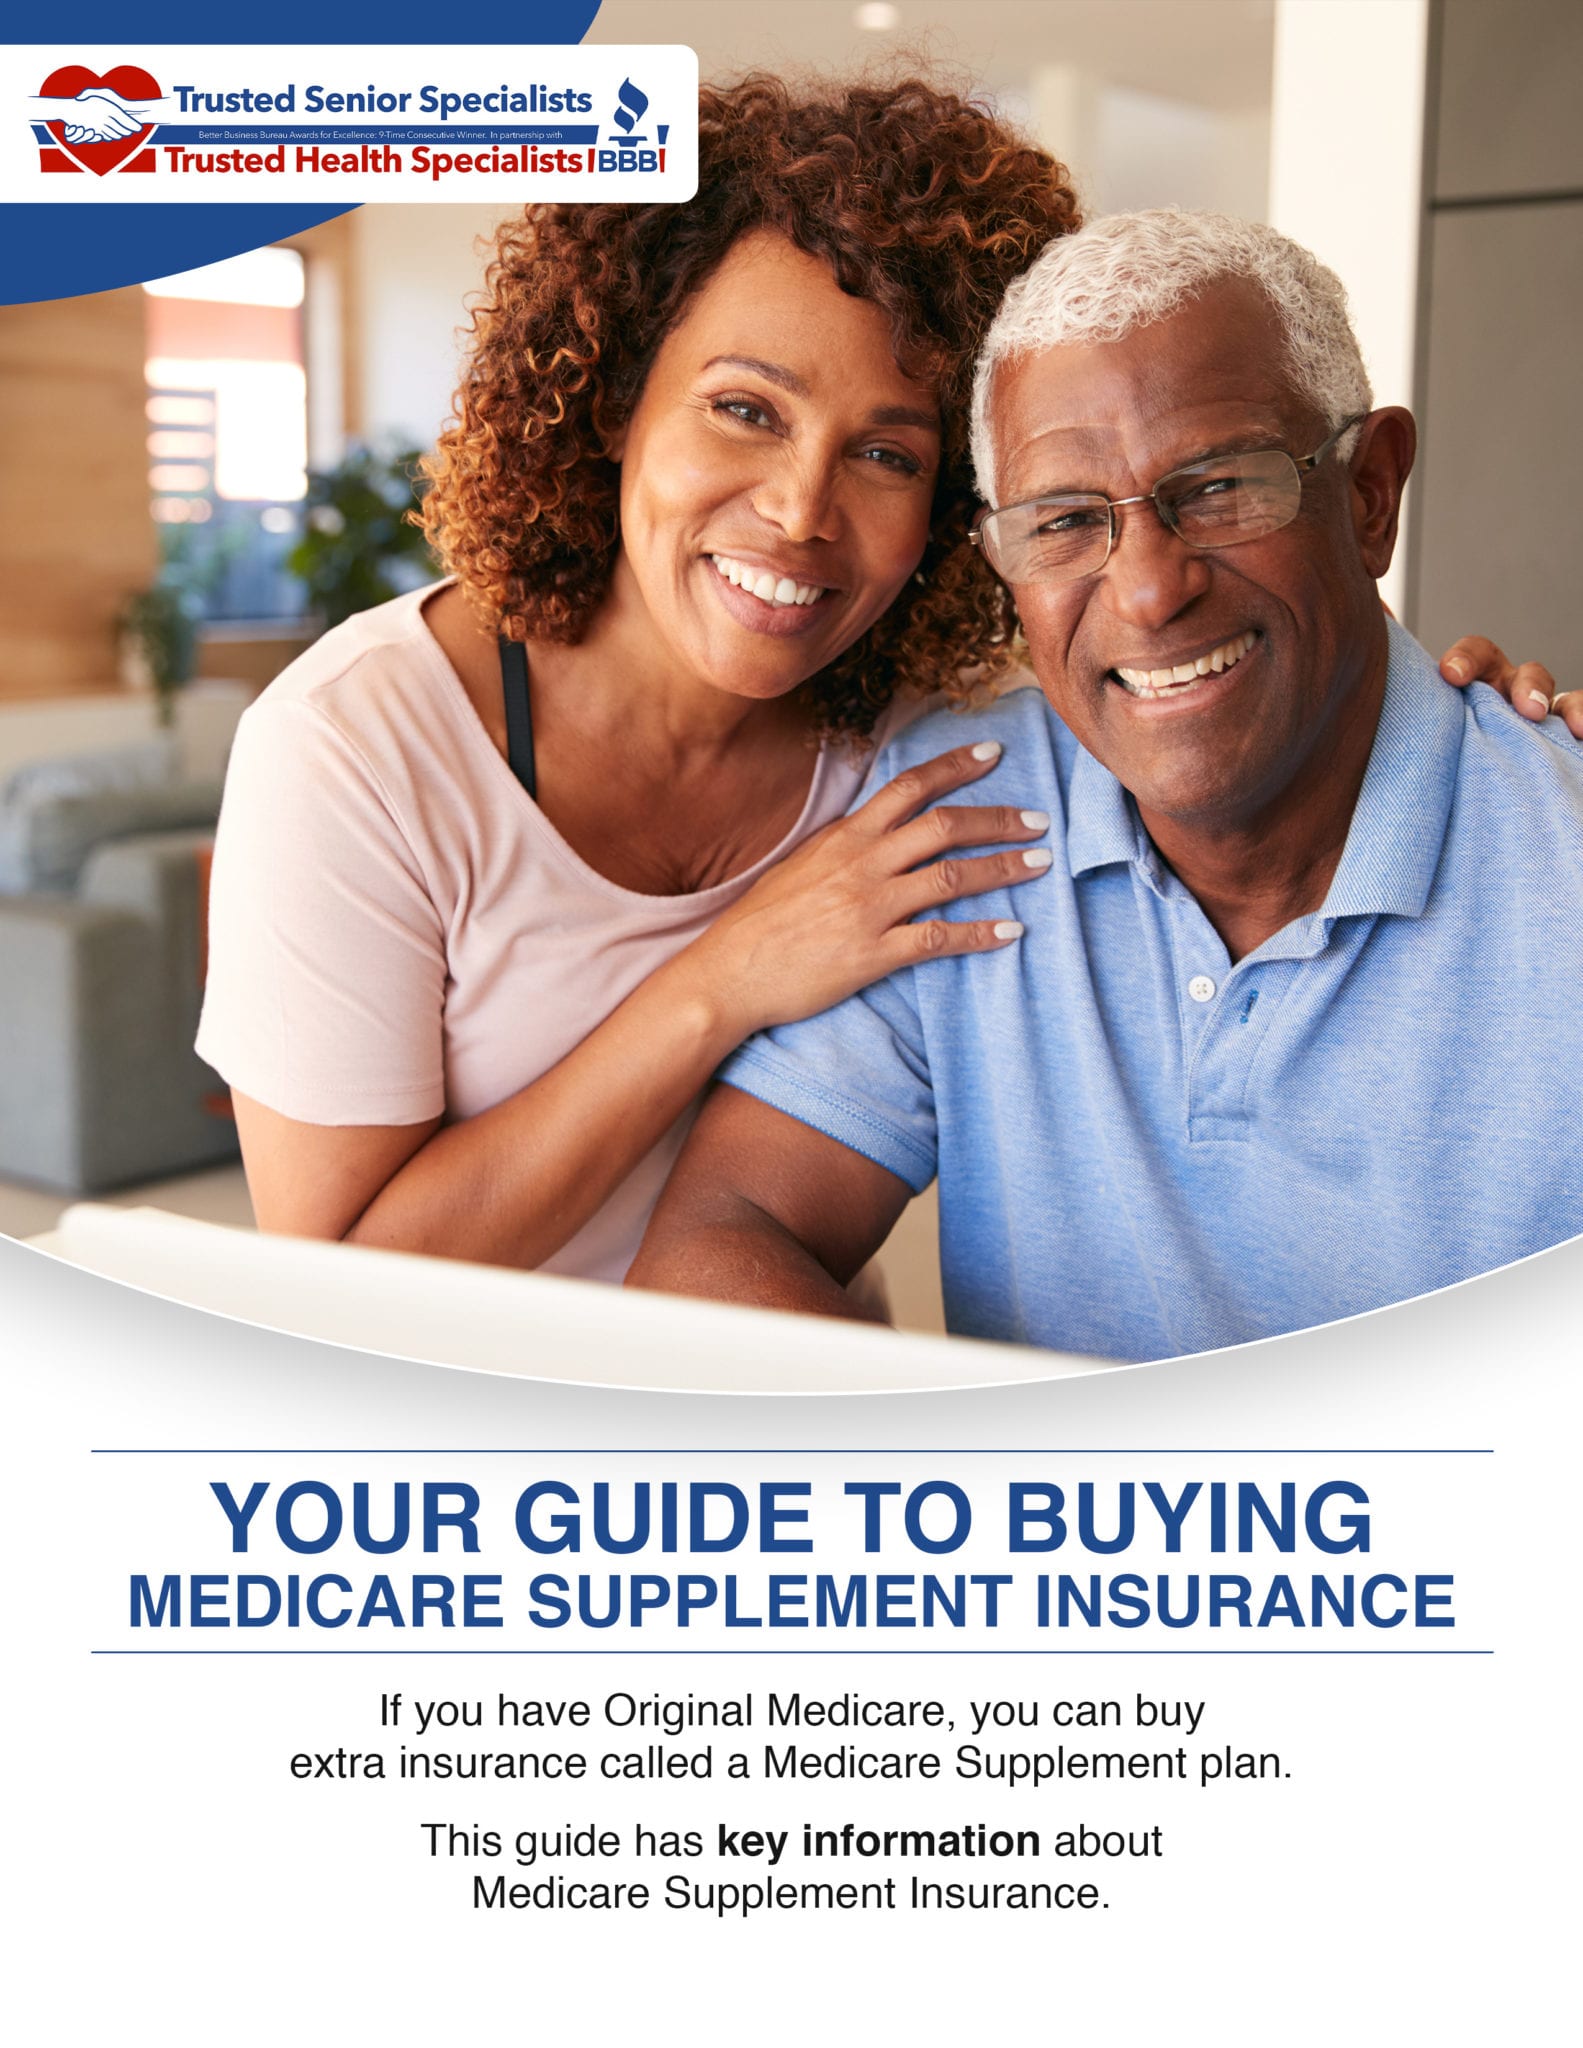 1TSS-Your-Guide-to-Buying-Medicare-Supplement-Insurance-Cover-1583x2048